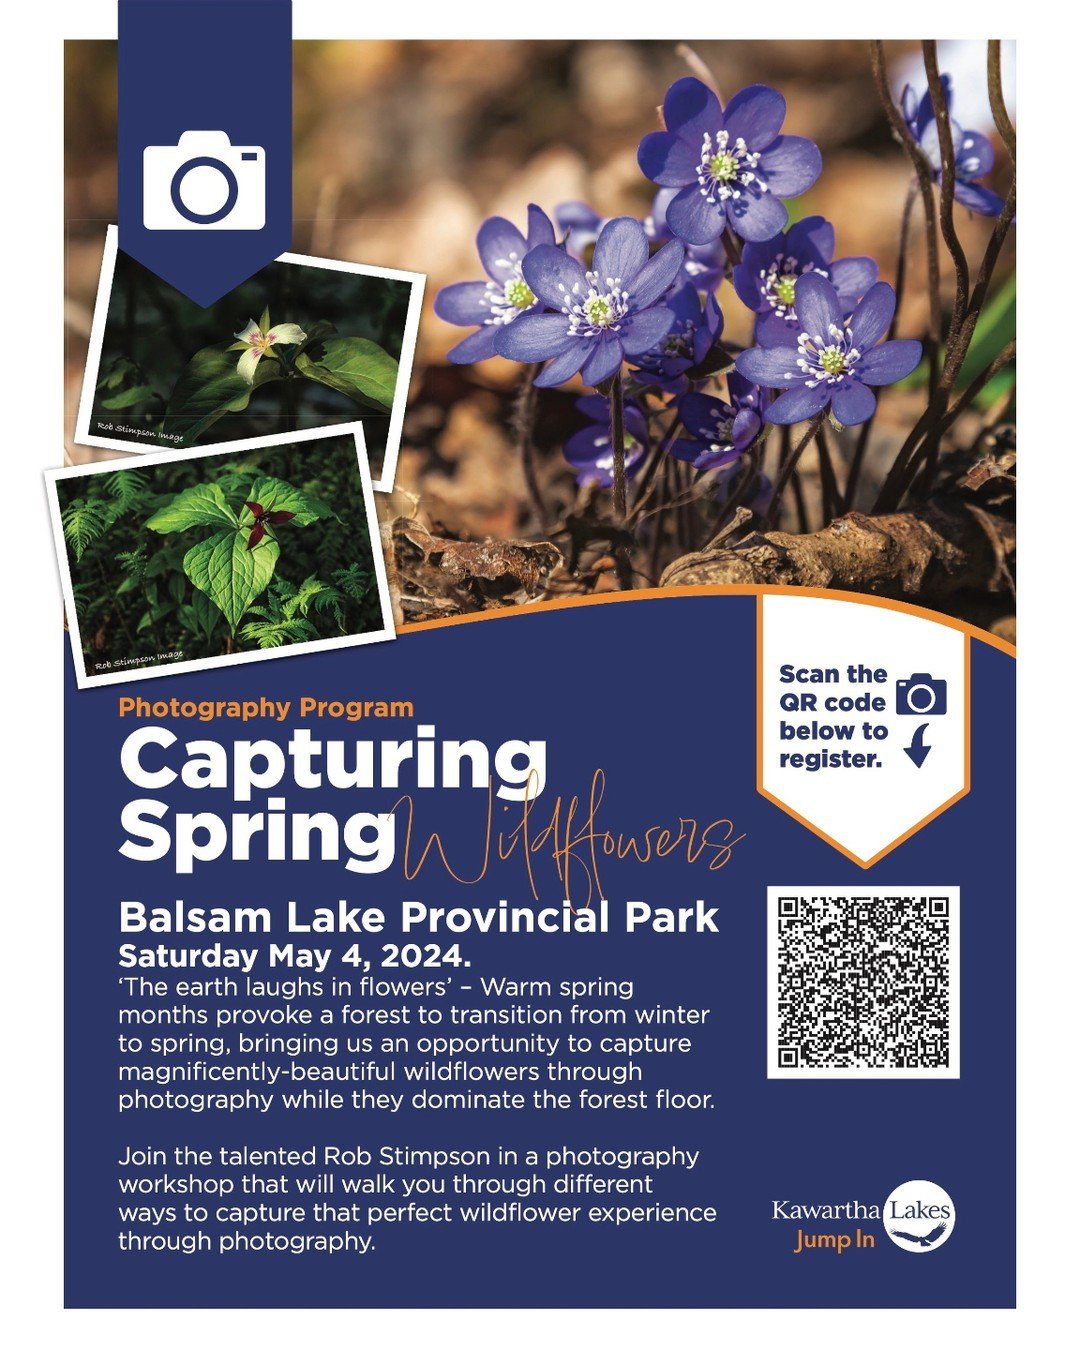 Keep an eye out for CKL's upcoming photography workshop, Capturing Spring Wildflowers 📸🌷

The talented Rob Stimpson has returned to lead and encourage photographers to go beyond the ordinary and capture images that help to develop their own style. 